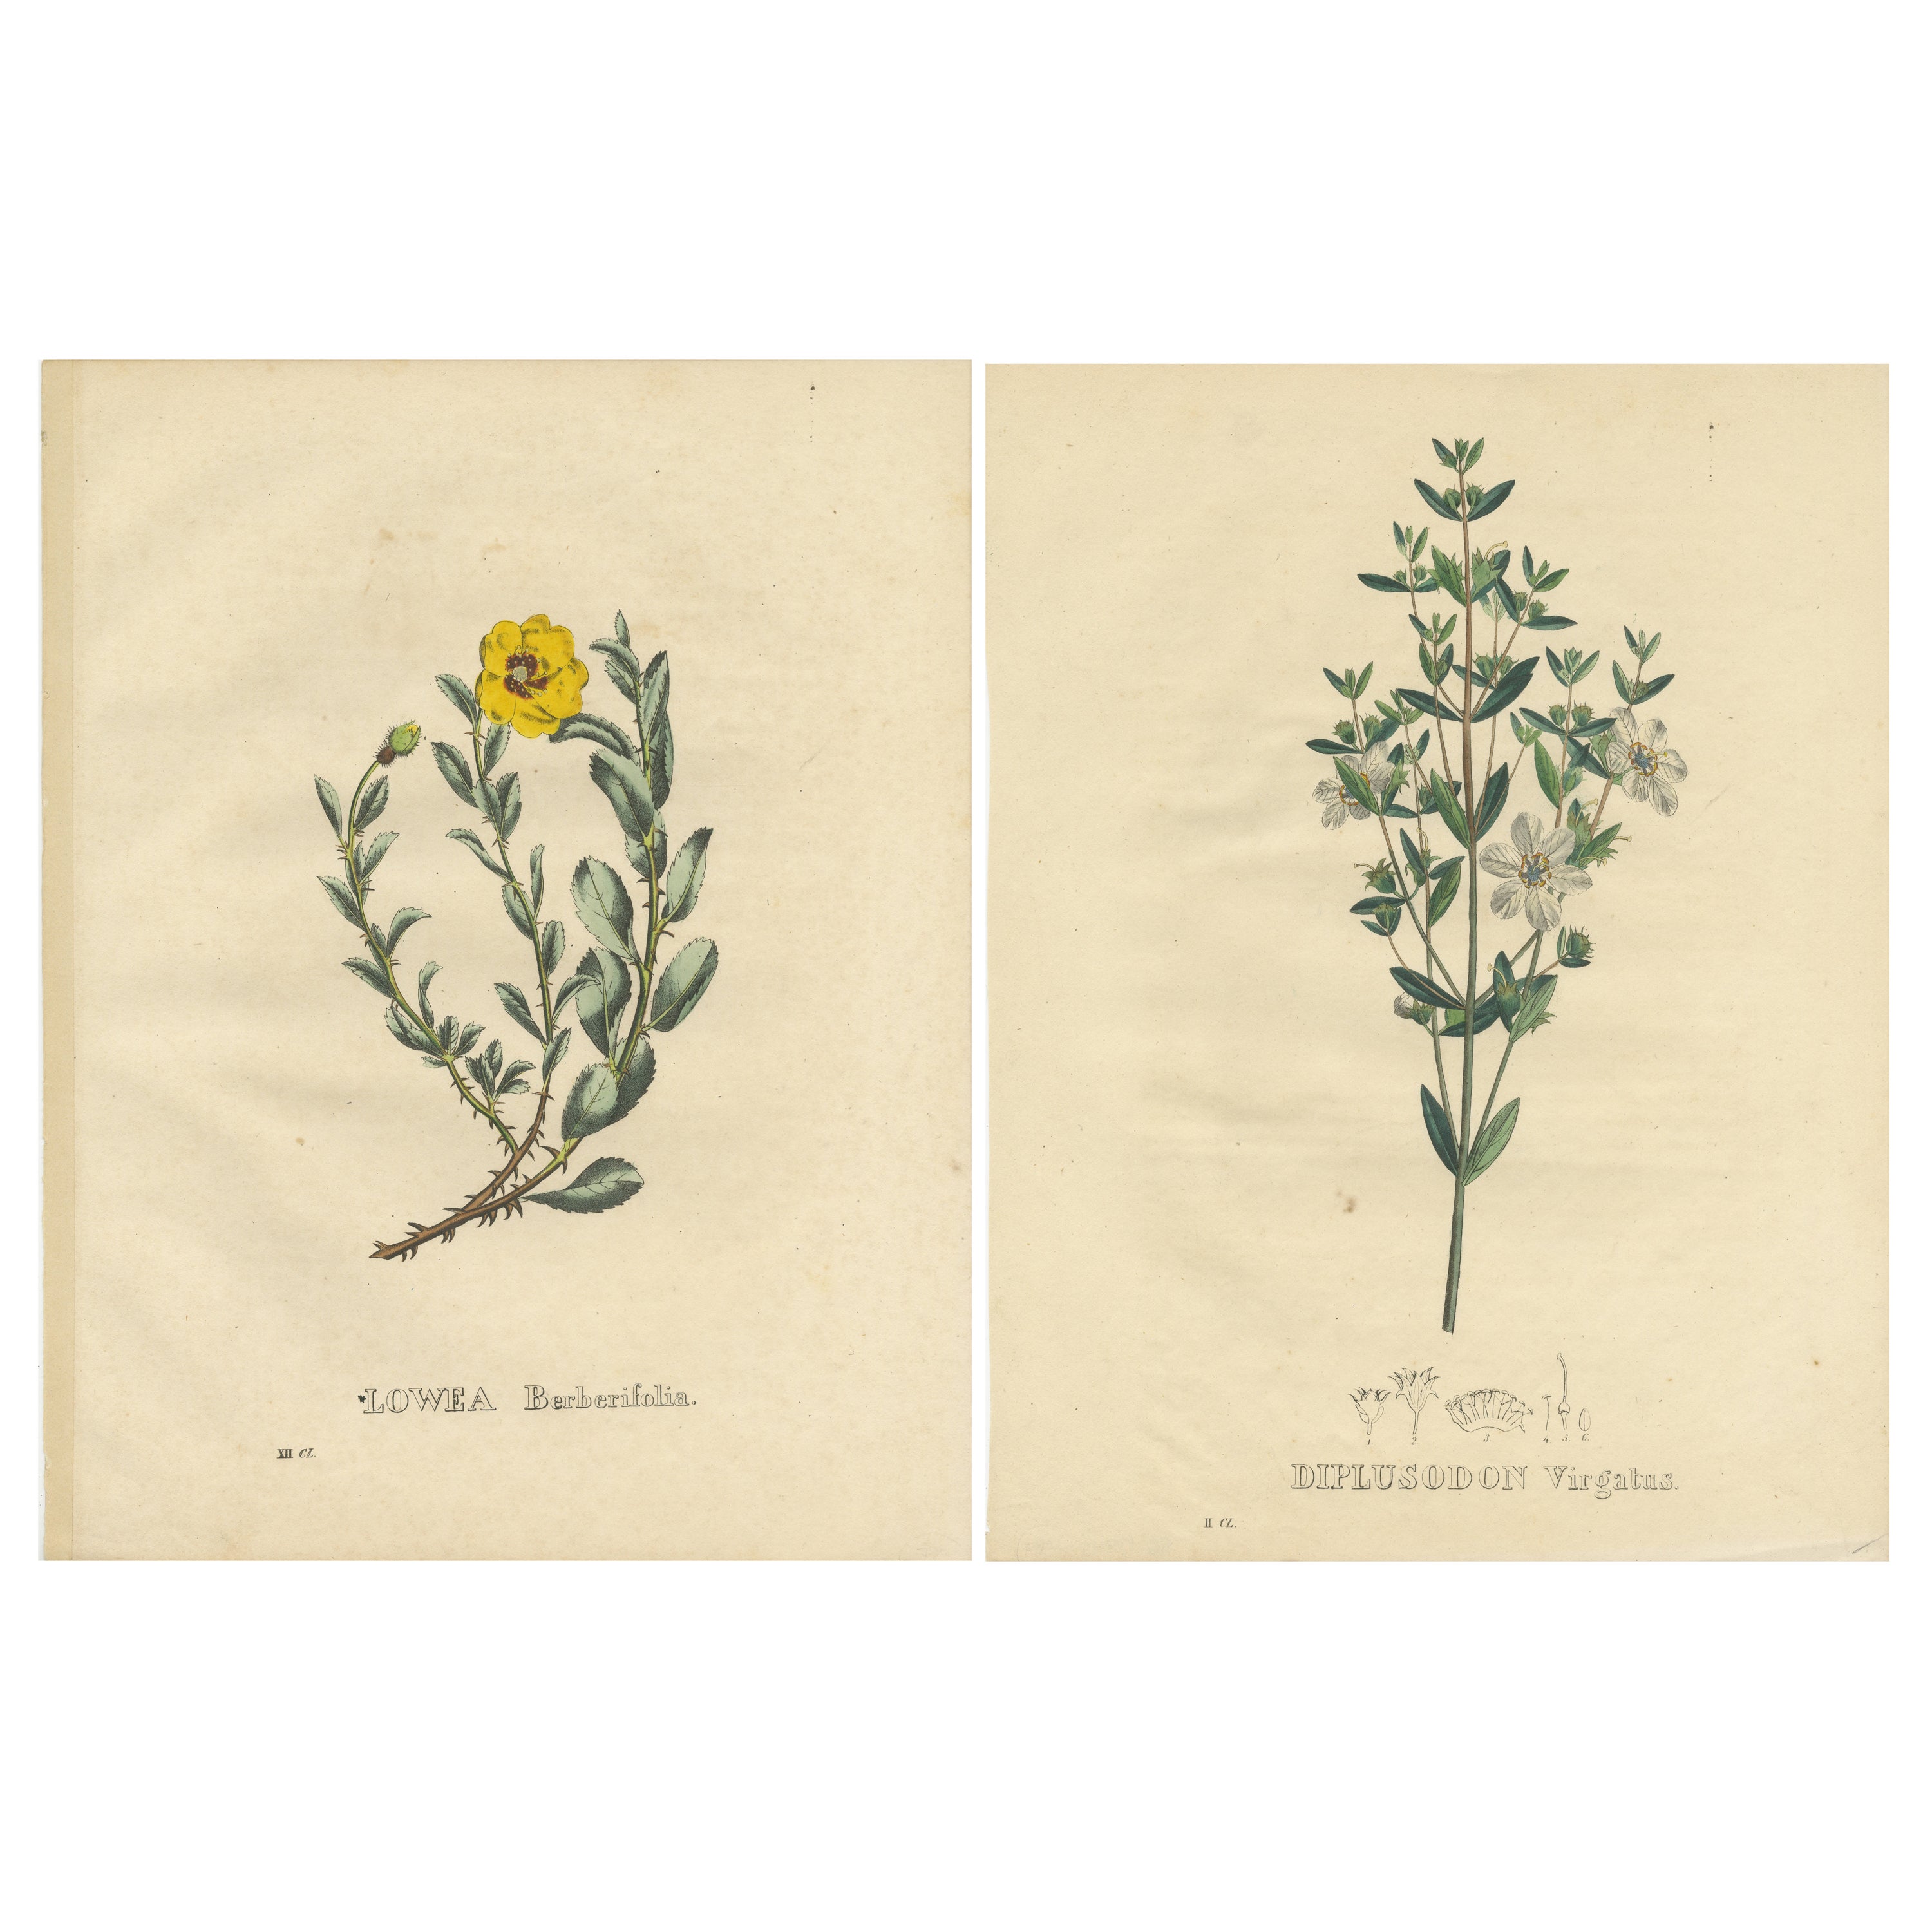 Set of 2 Antique Botanical Prints of the Rosa Berberifolia and Diplusodon For Sale